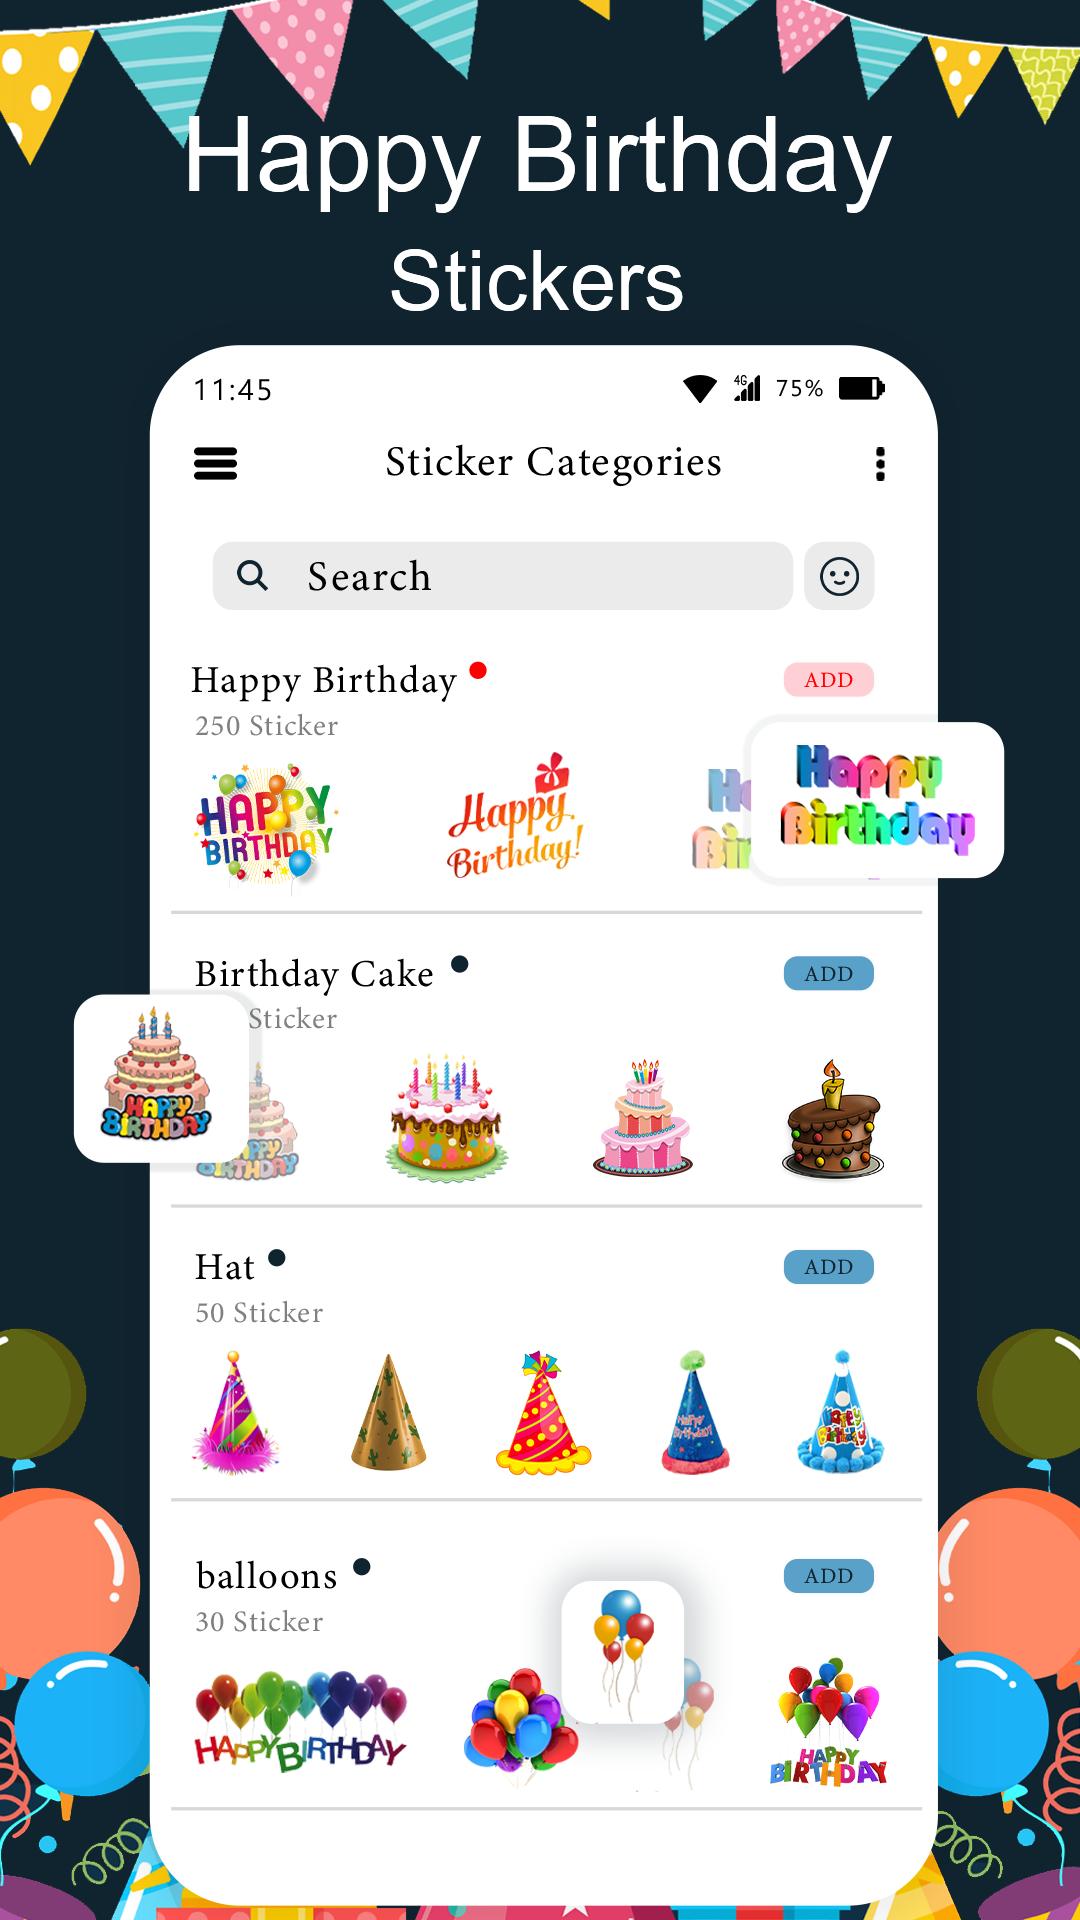 Happy Birthday Stickers for WhatsApp 2021 APK pour Android Télécharger